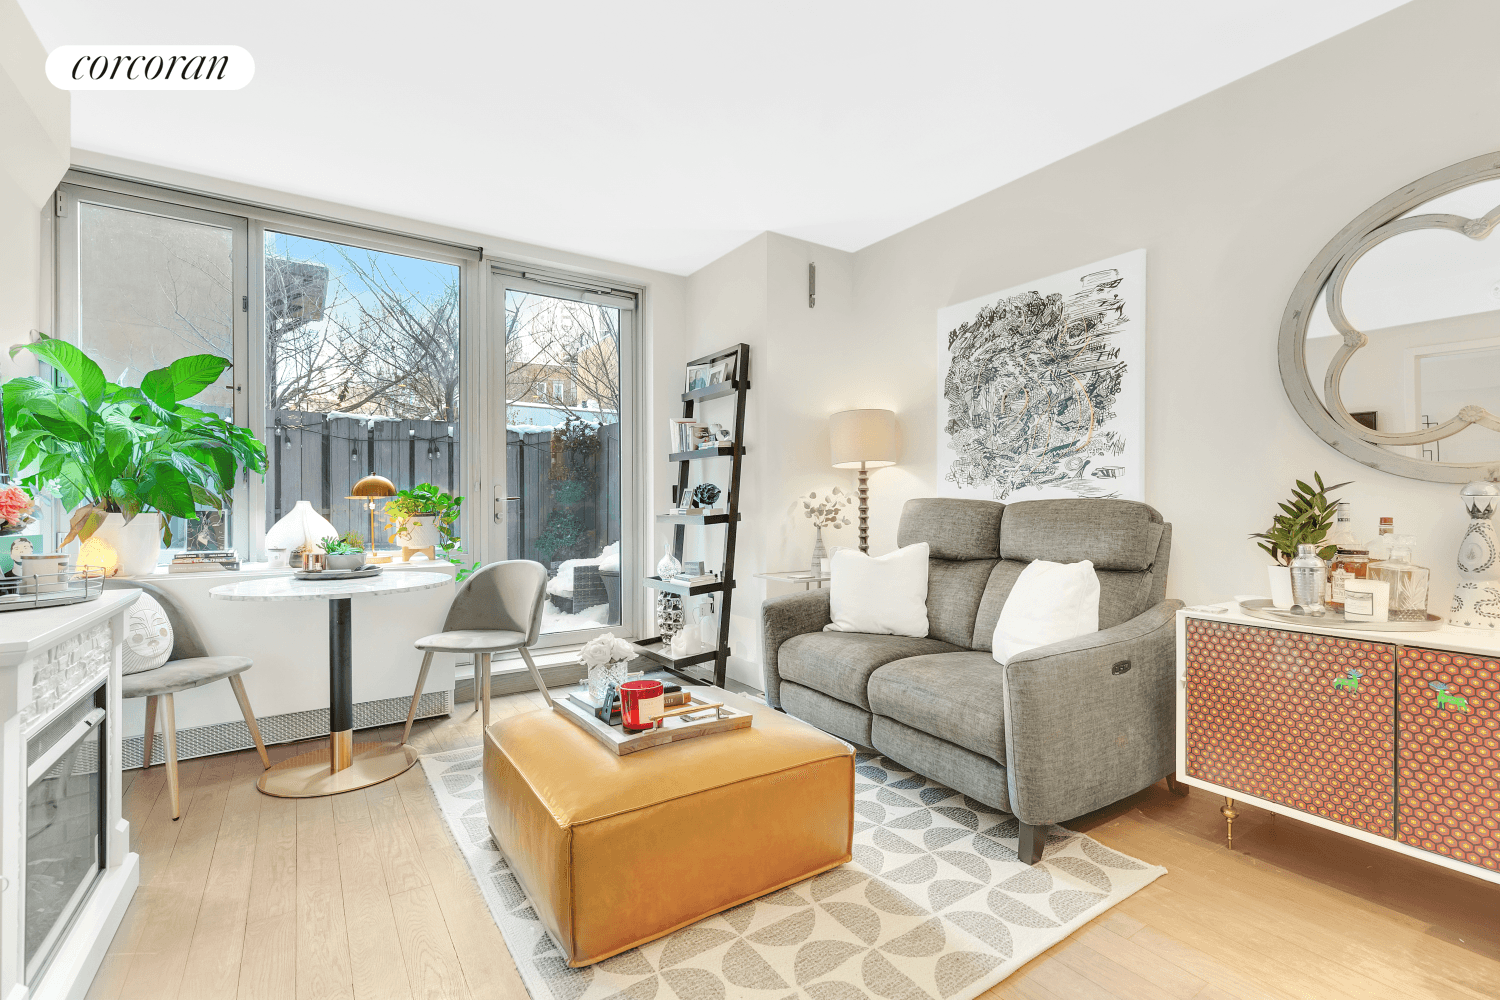 The ChathamThis one bedroom beauty at the modern, luxurious Chatham44 condominium in Midtown West is truly irresistible, boasting refined living space and an expansive 212 square feet outdoor terrace !